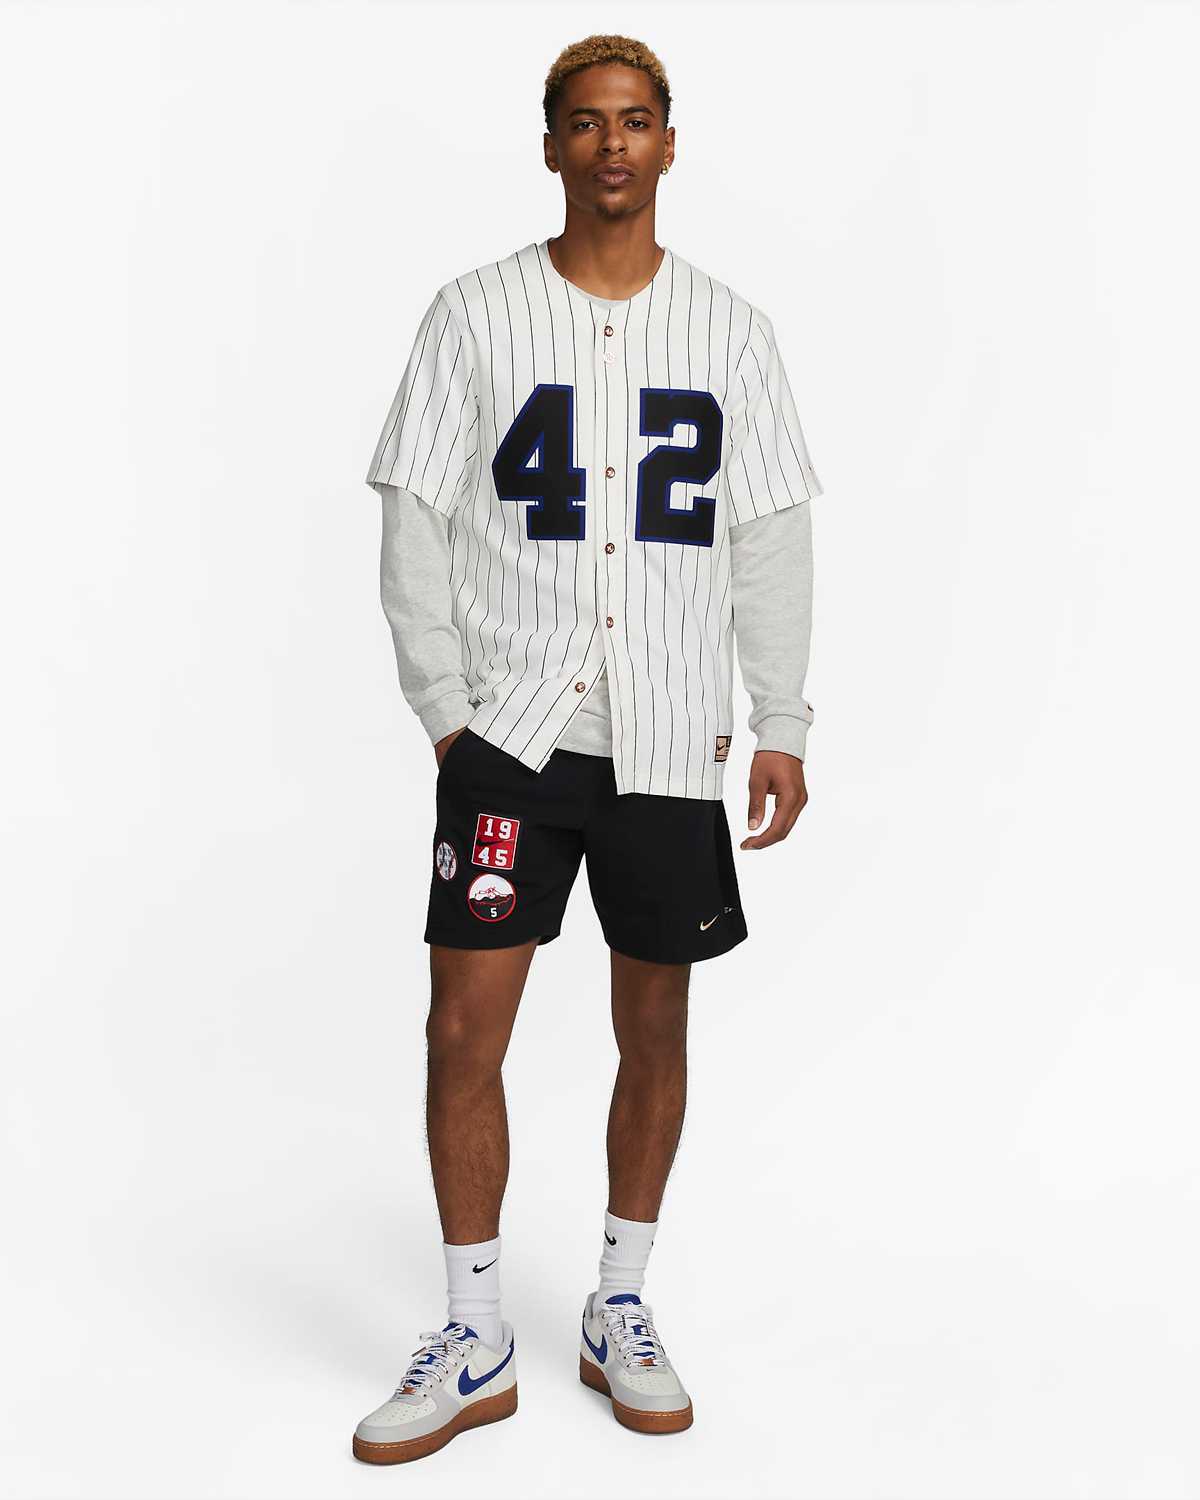 Nike-Air-Force-1-Low-Jackie-Robinson-Baseball-Jersey-Shirt-Outfit